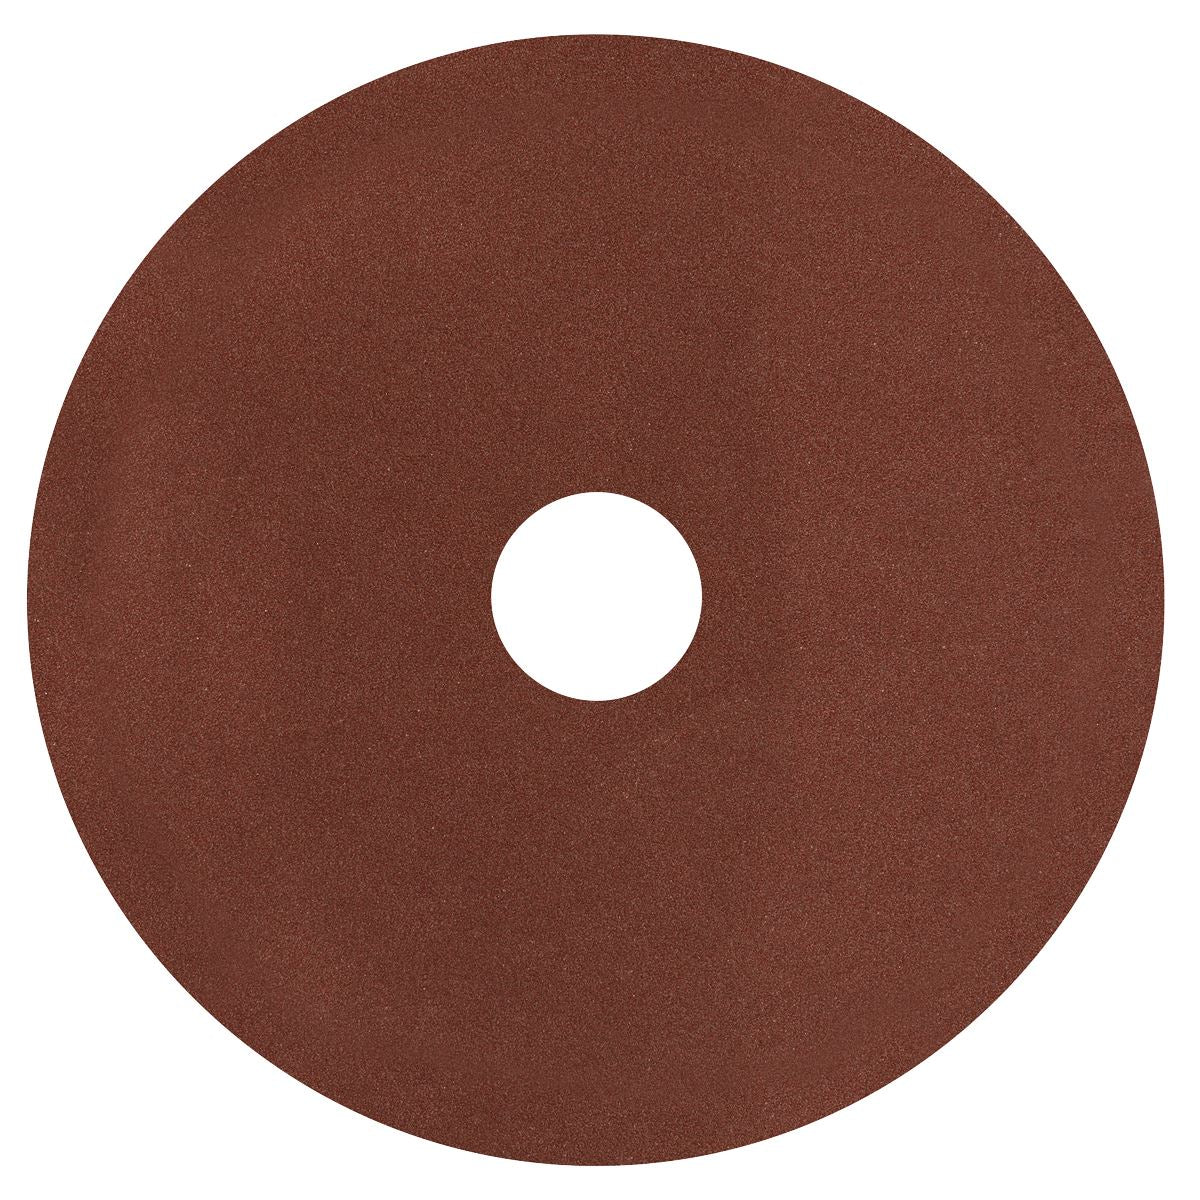 Worksafe by Sealey Fibre Backed Disc Ø125mm - 80Grit Pack of 25